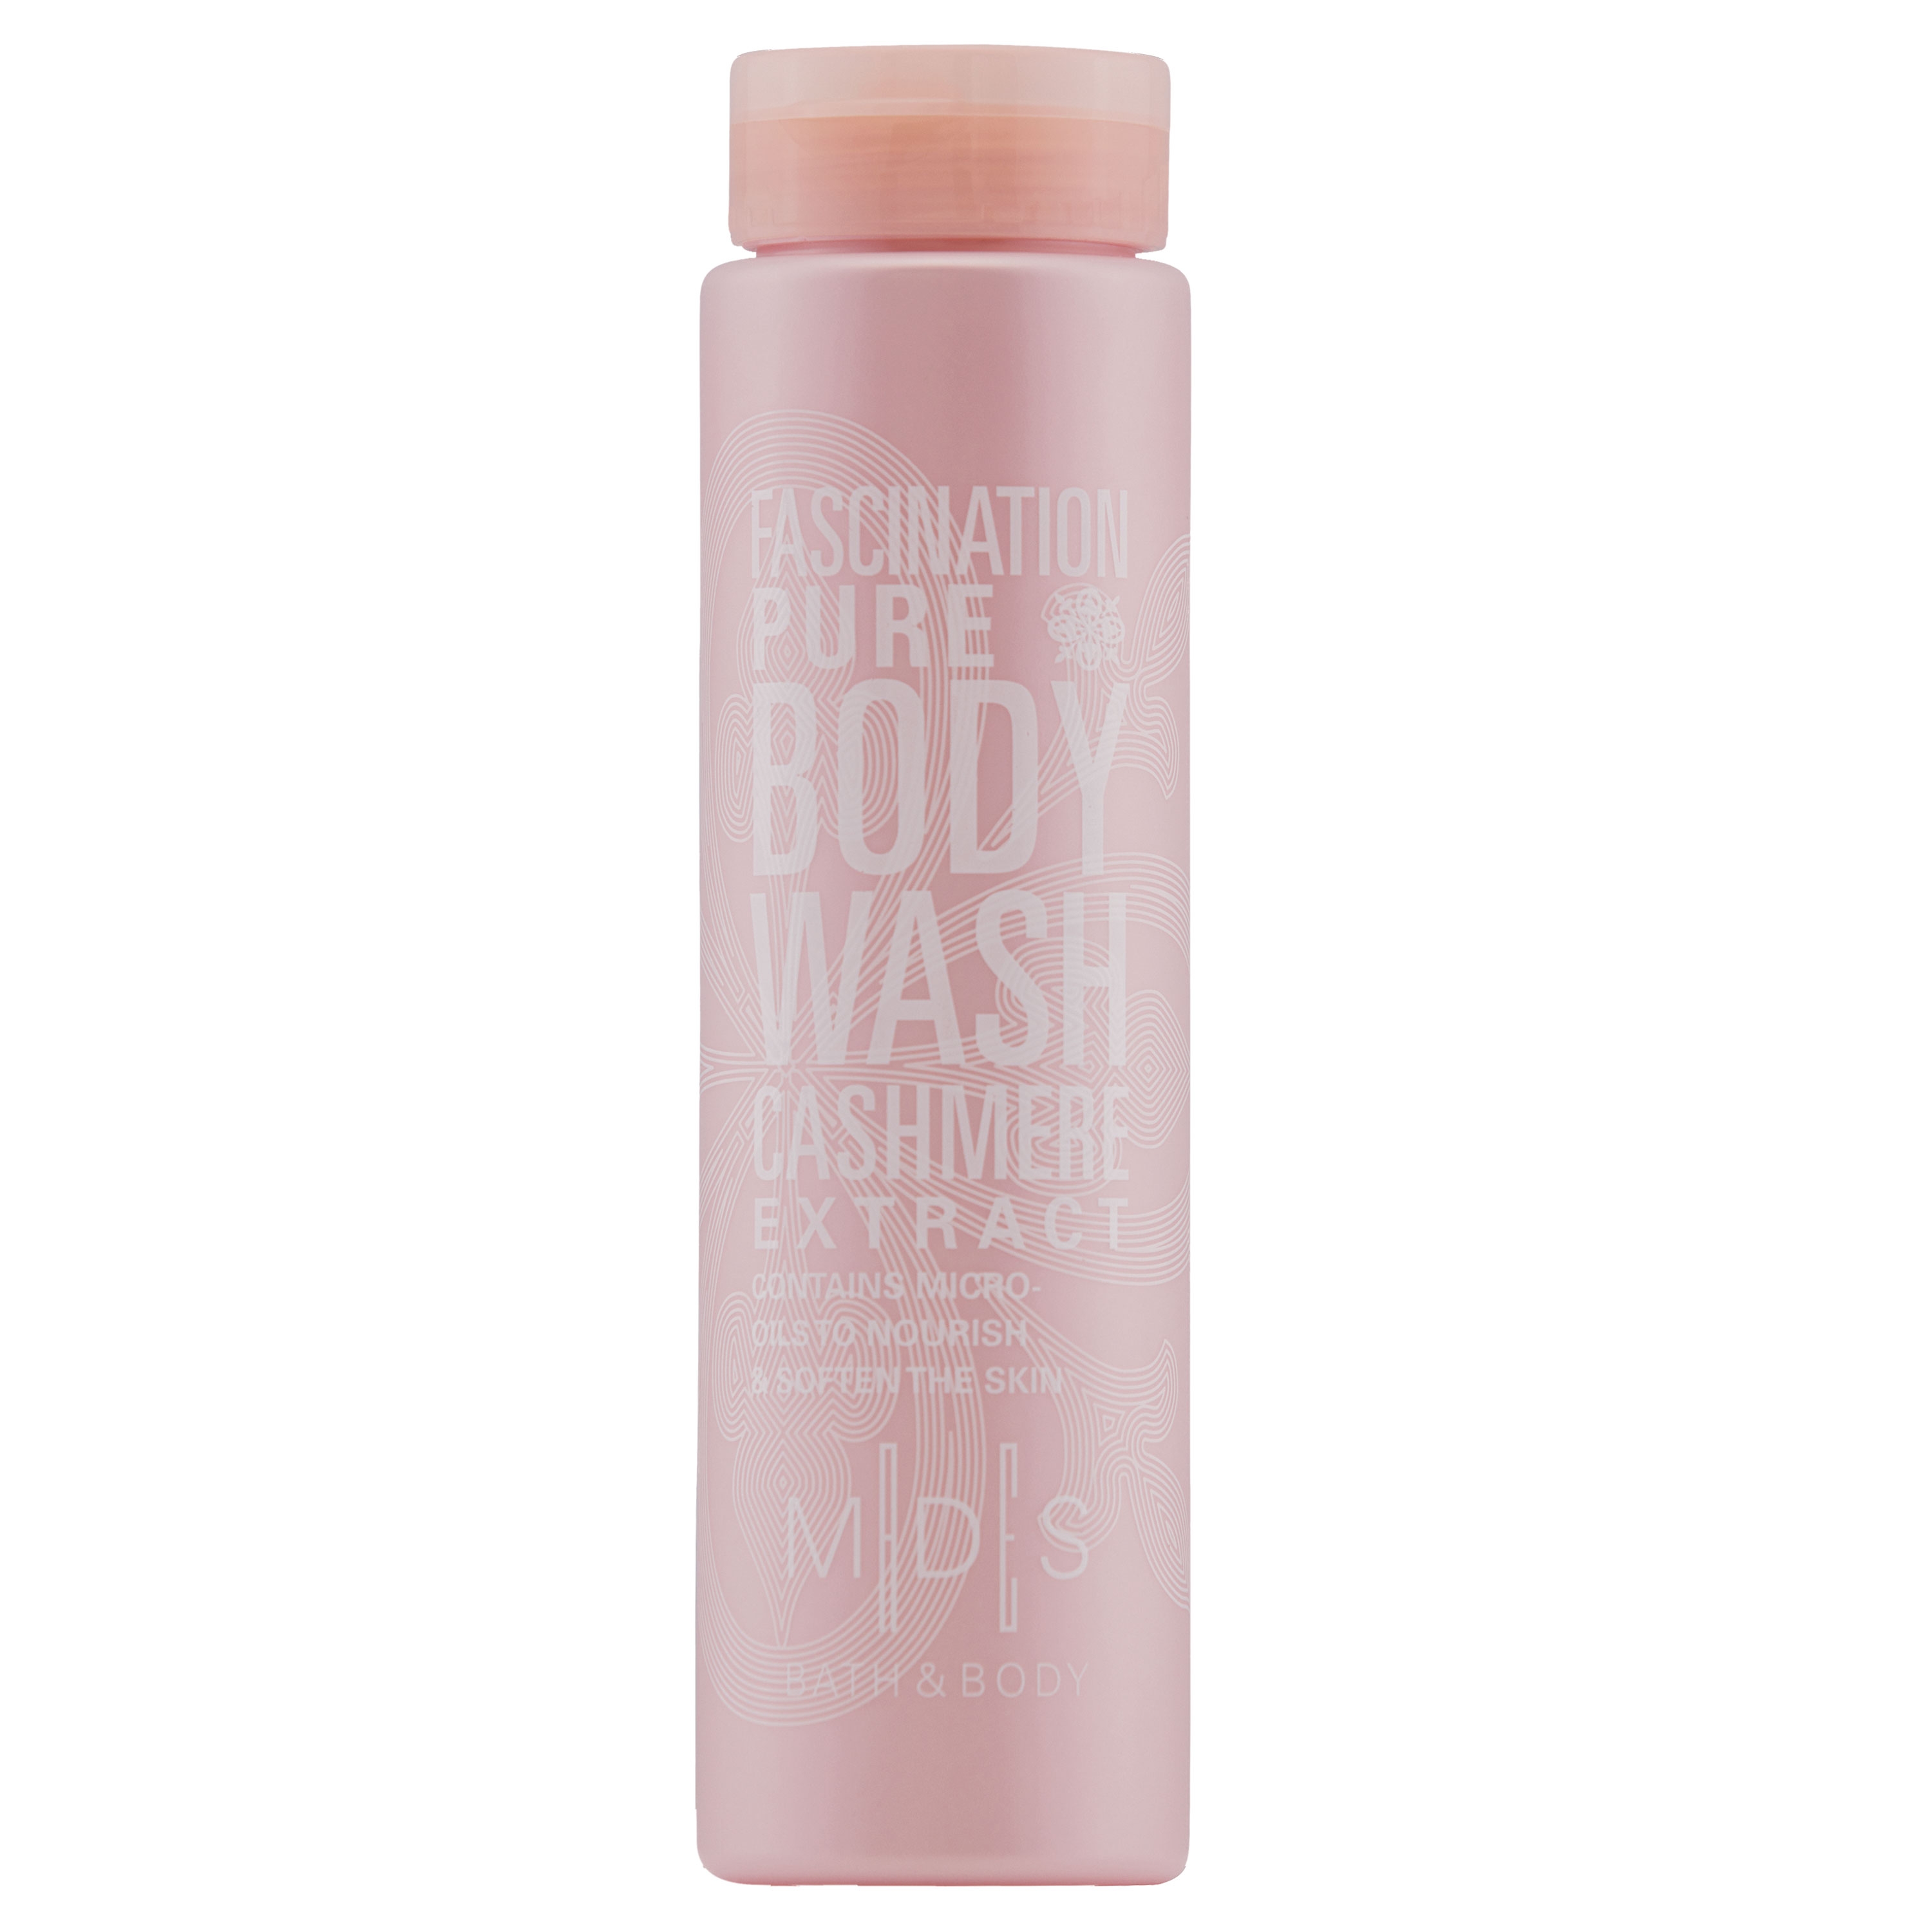 MADES | Mades Bath & Body Fascination Pure Body Wash 200ML Pale Pink